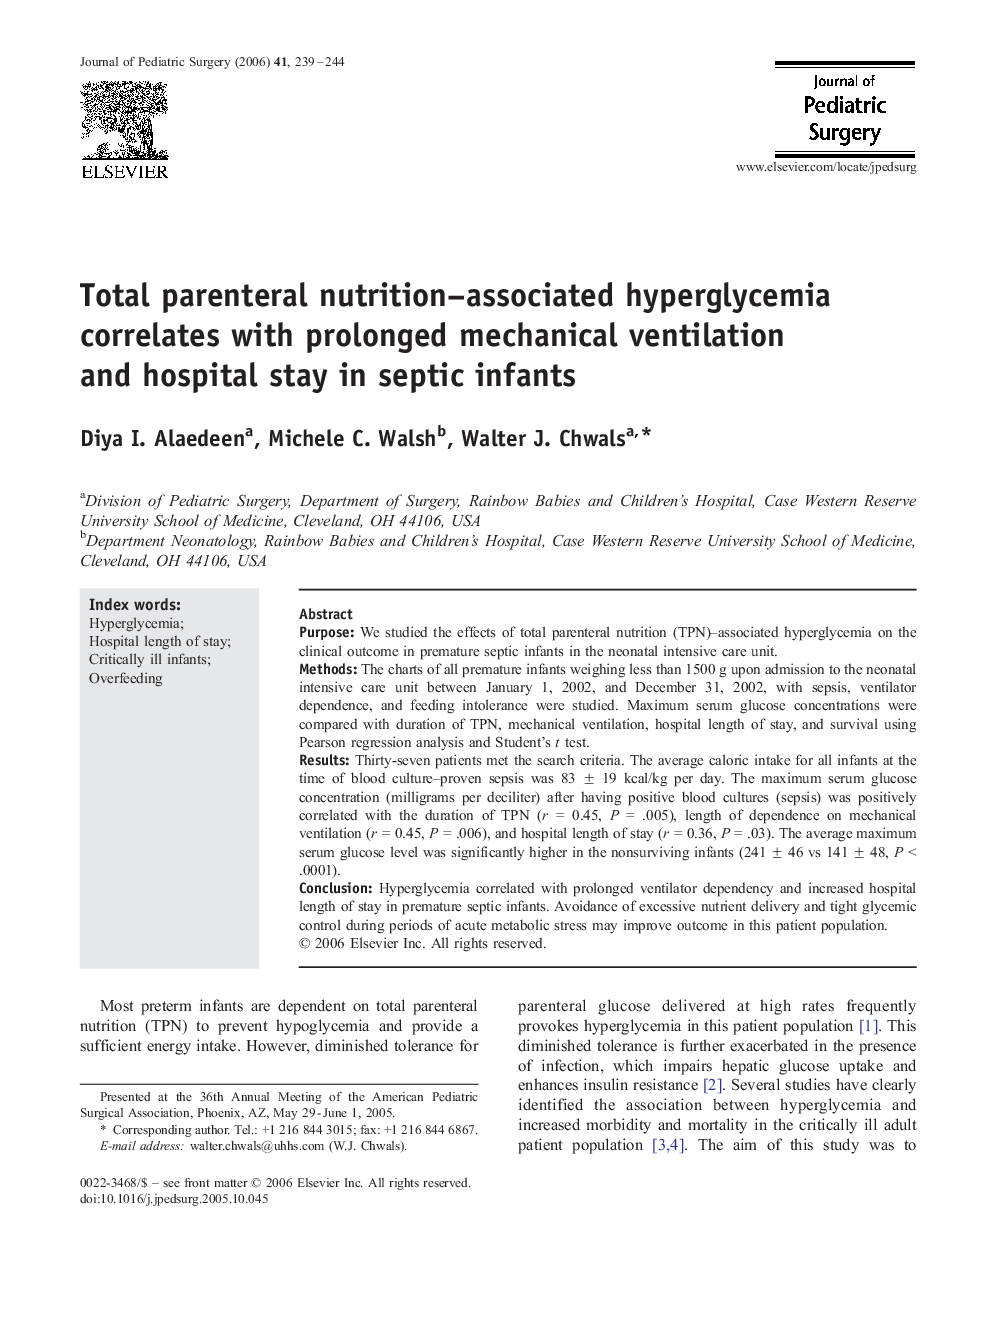 Total parenteral nutrition–associated hyperglycemia correlates with prolonged mechanical ventilation and hospital stay in septic infants 